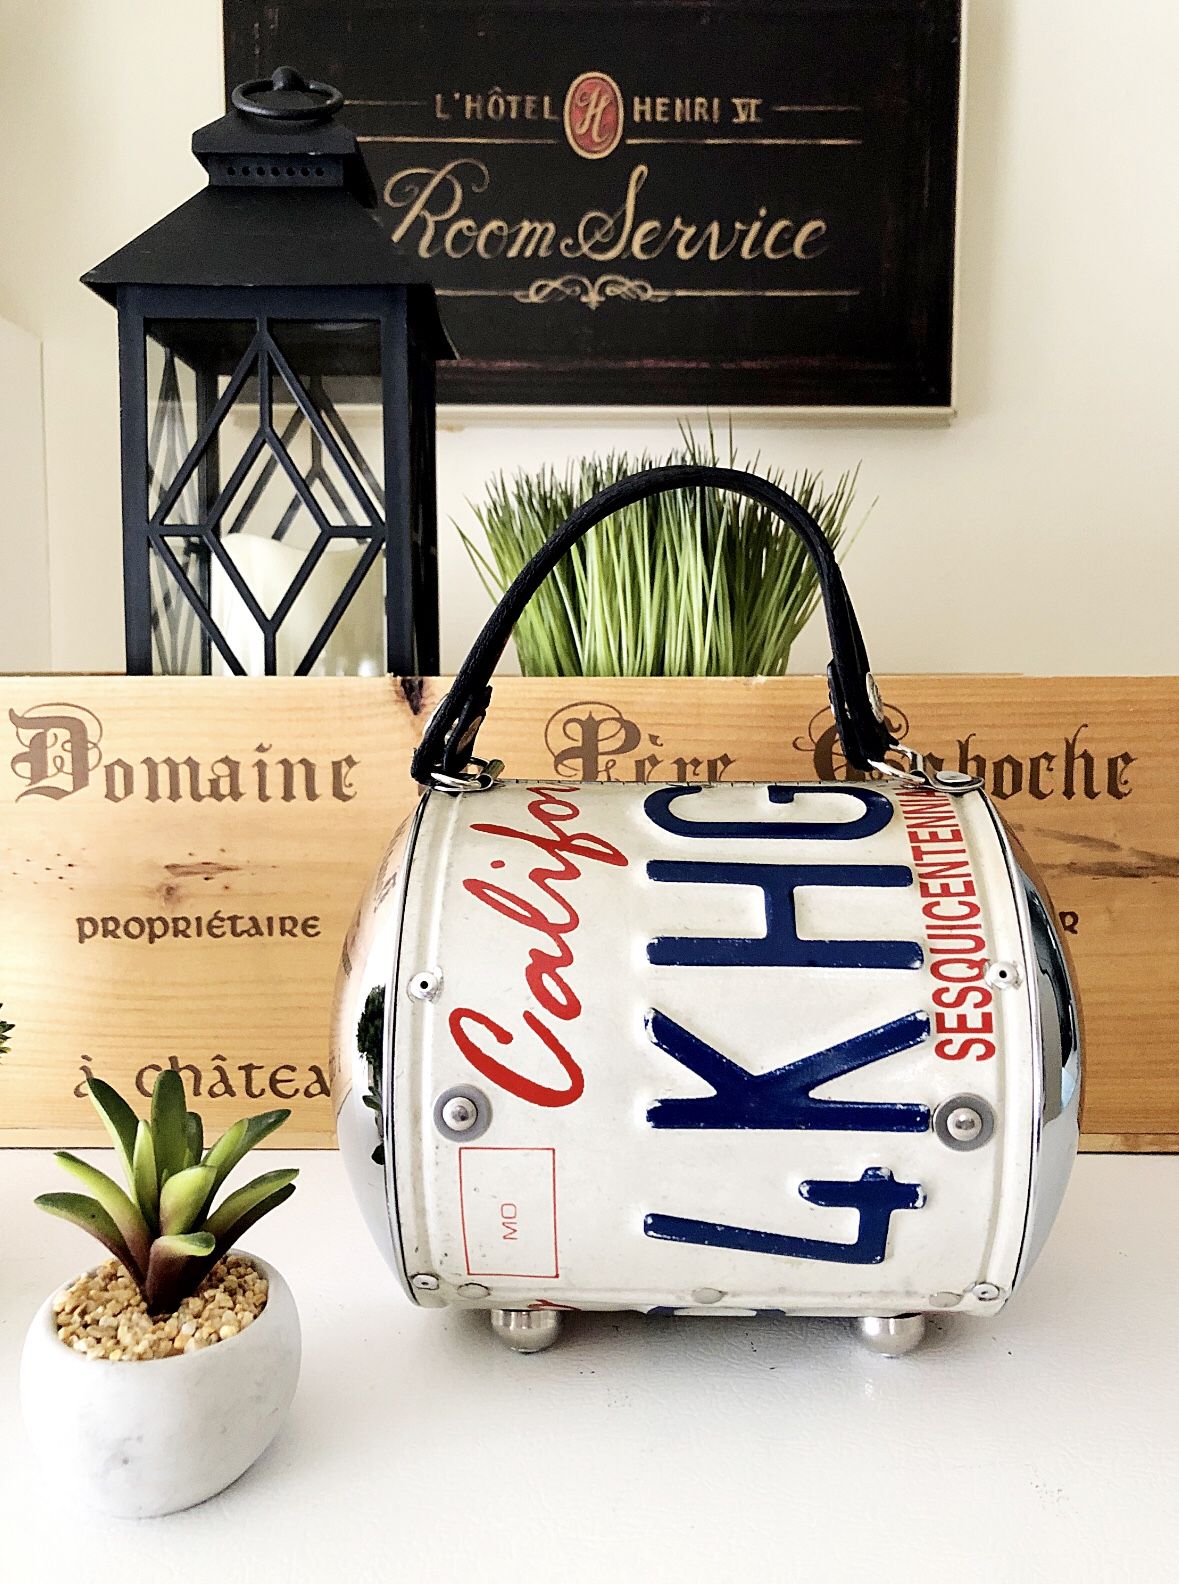 Little Earth California Plate Purse paid $375 Purchased at a booth during Art art Basel in Miami. Great condition! Recycled California license plate